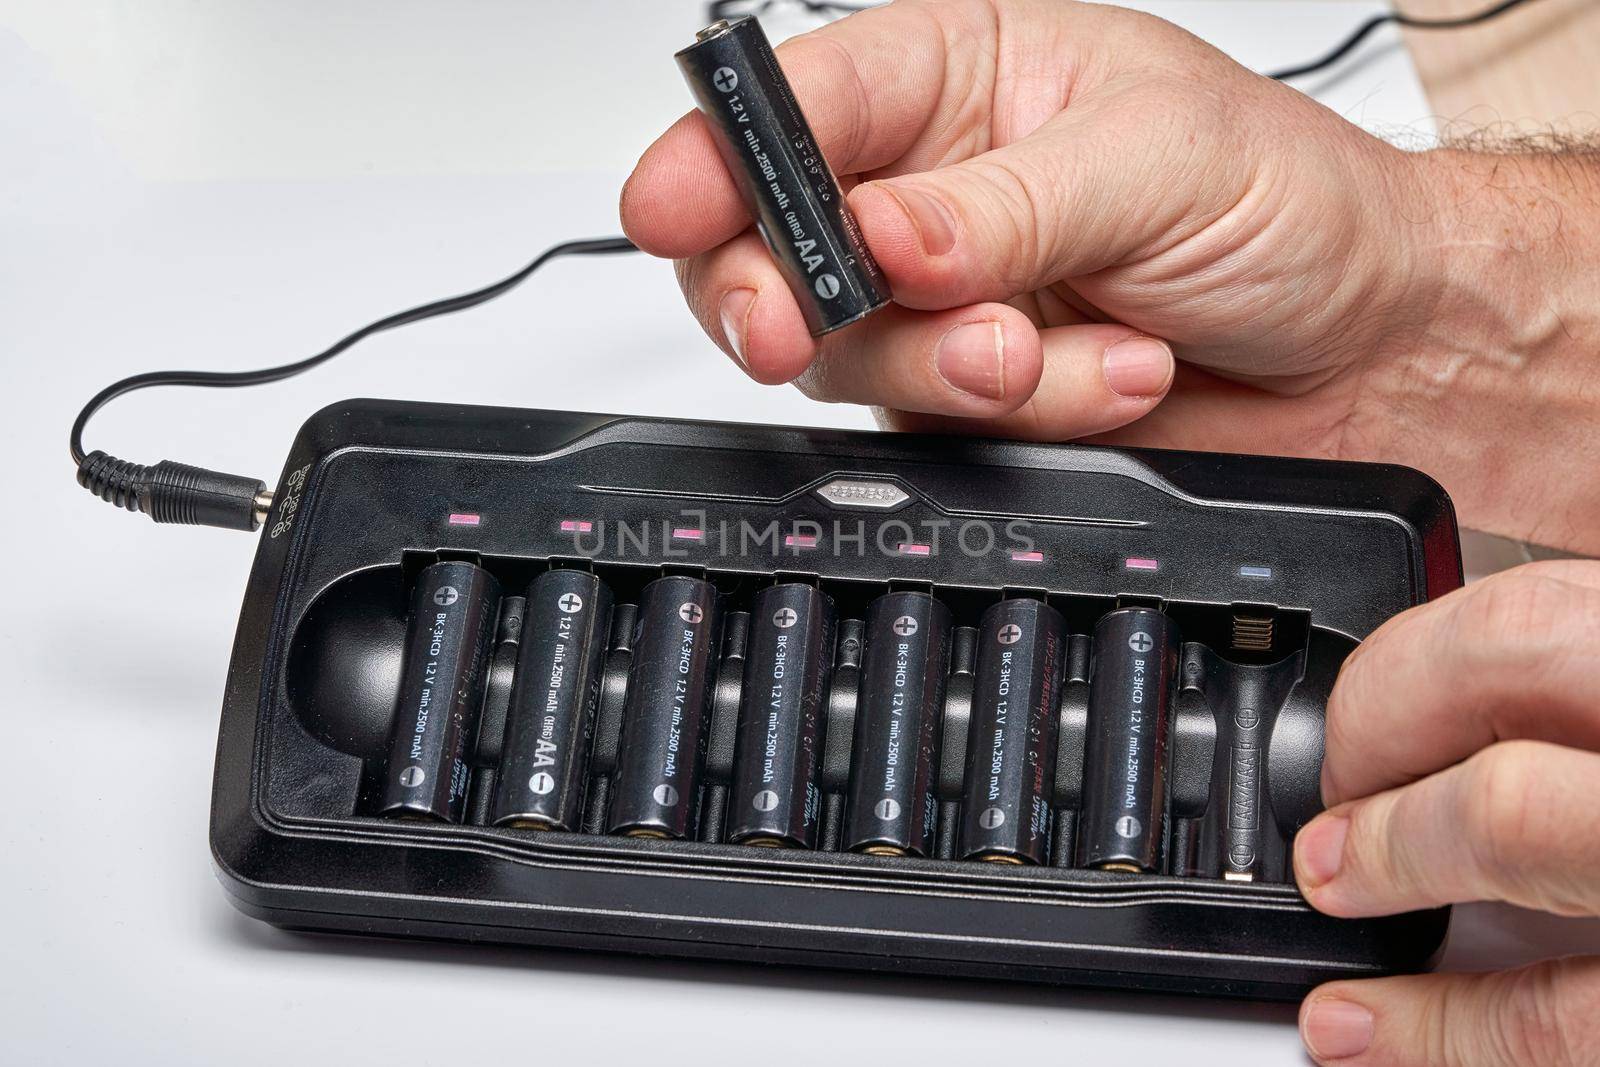 Hands insert AA batteries into black long charger. Close up